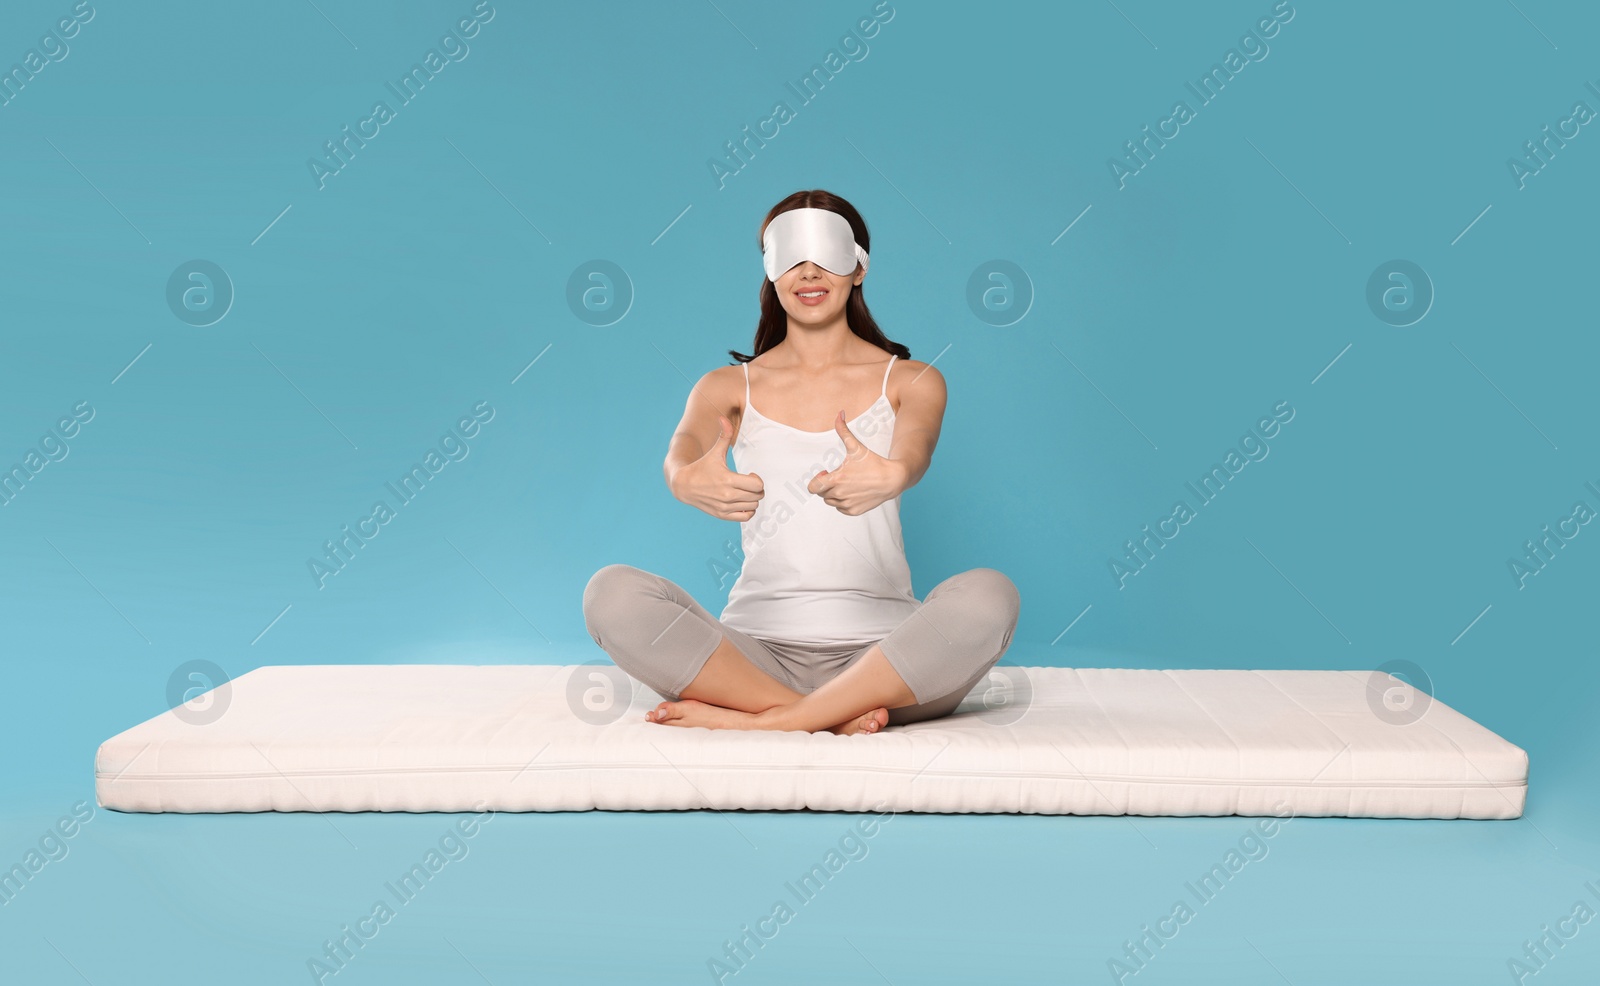 Photo of Woman in sleep mask sitting on soft mattress and showing thumbs up against light blue background